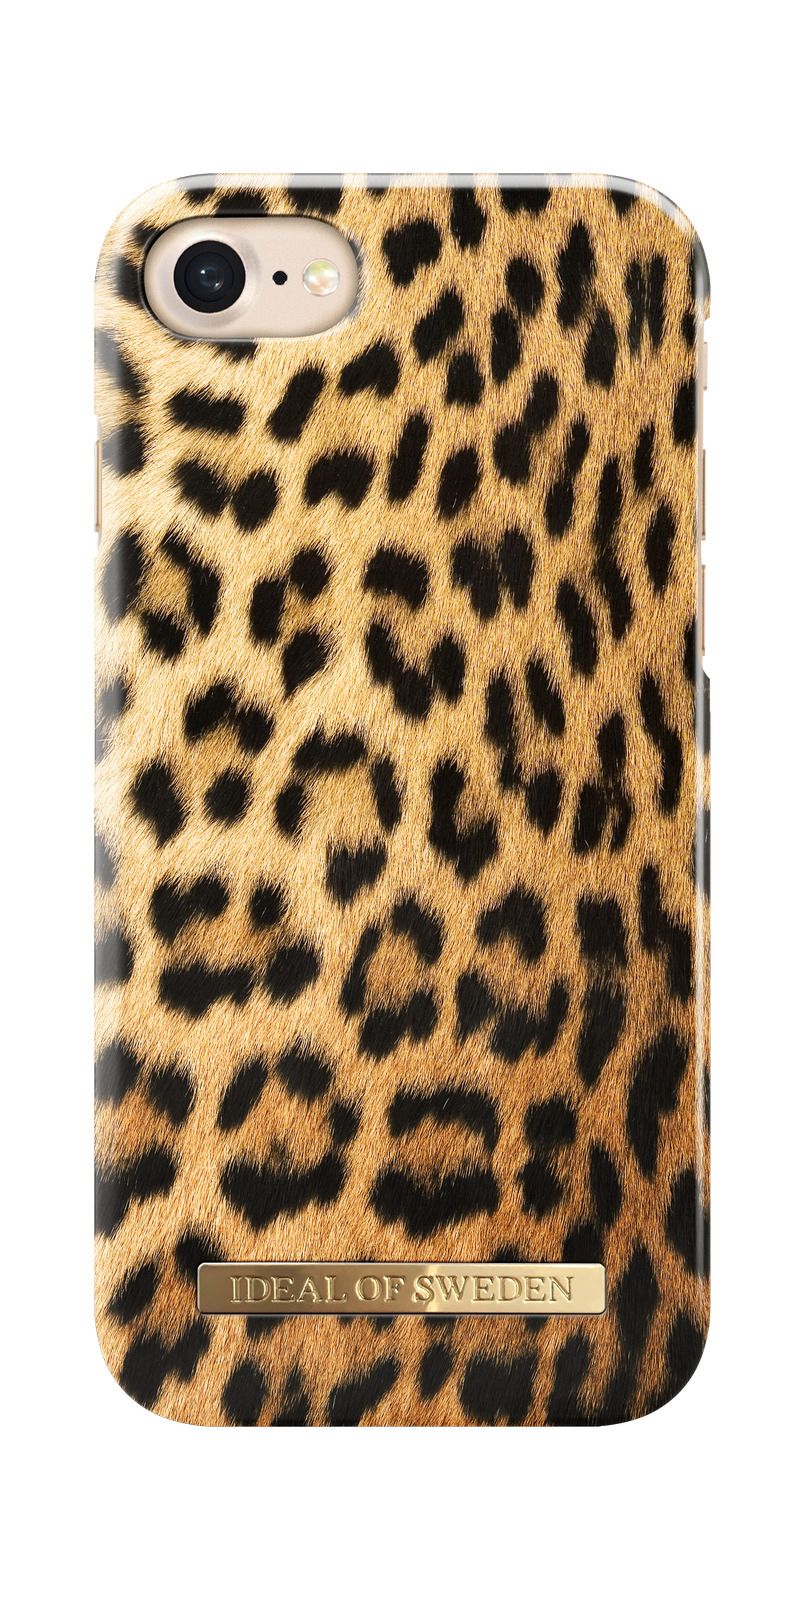 IDEAL OF SWEDEN Fashion, Backcover, 7, Wild Leopard Apple, 6, iPhone iPhone iPhone 8